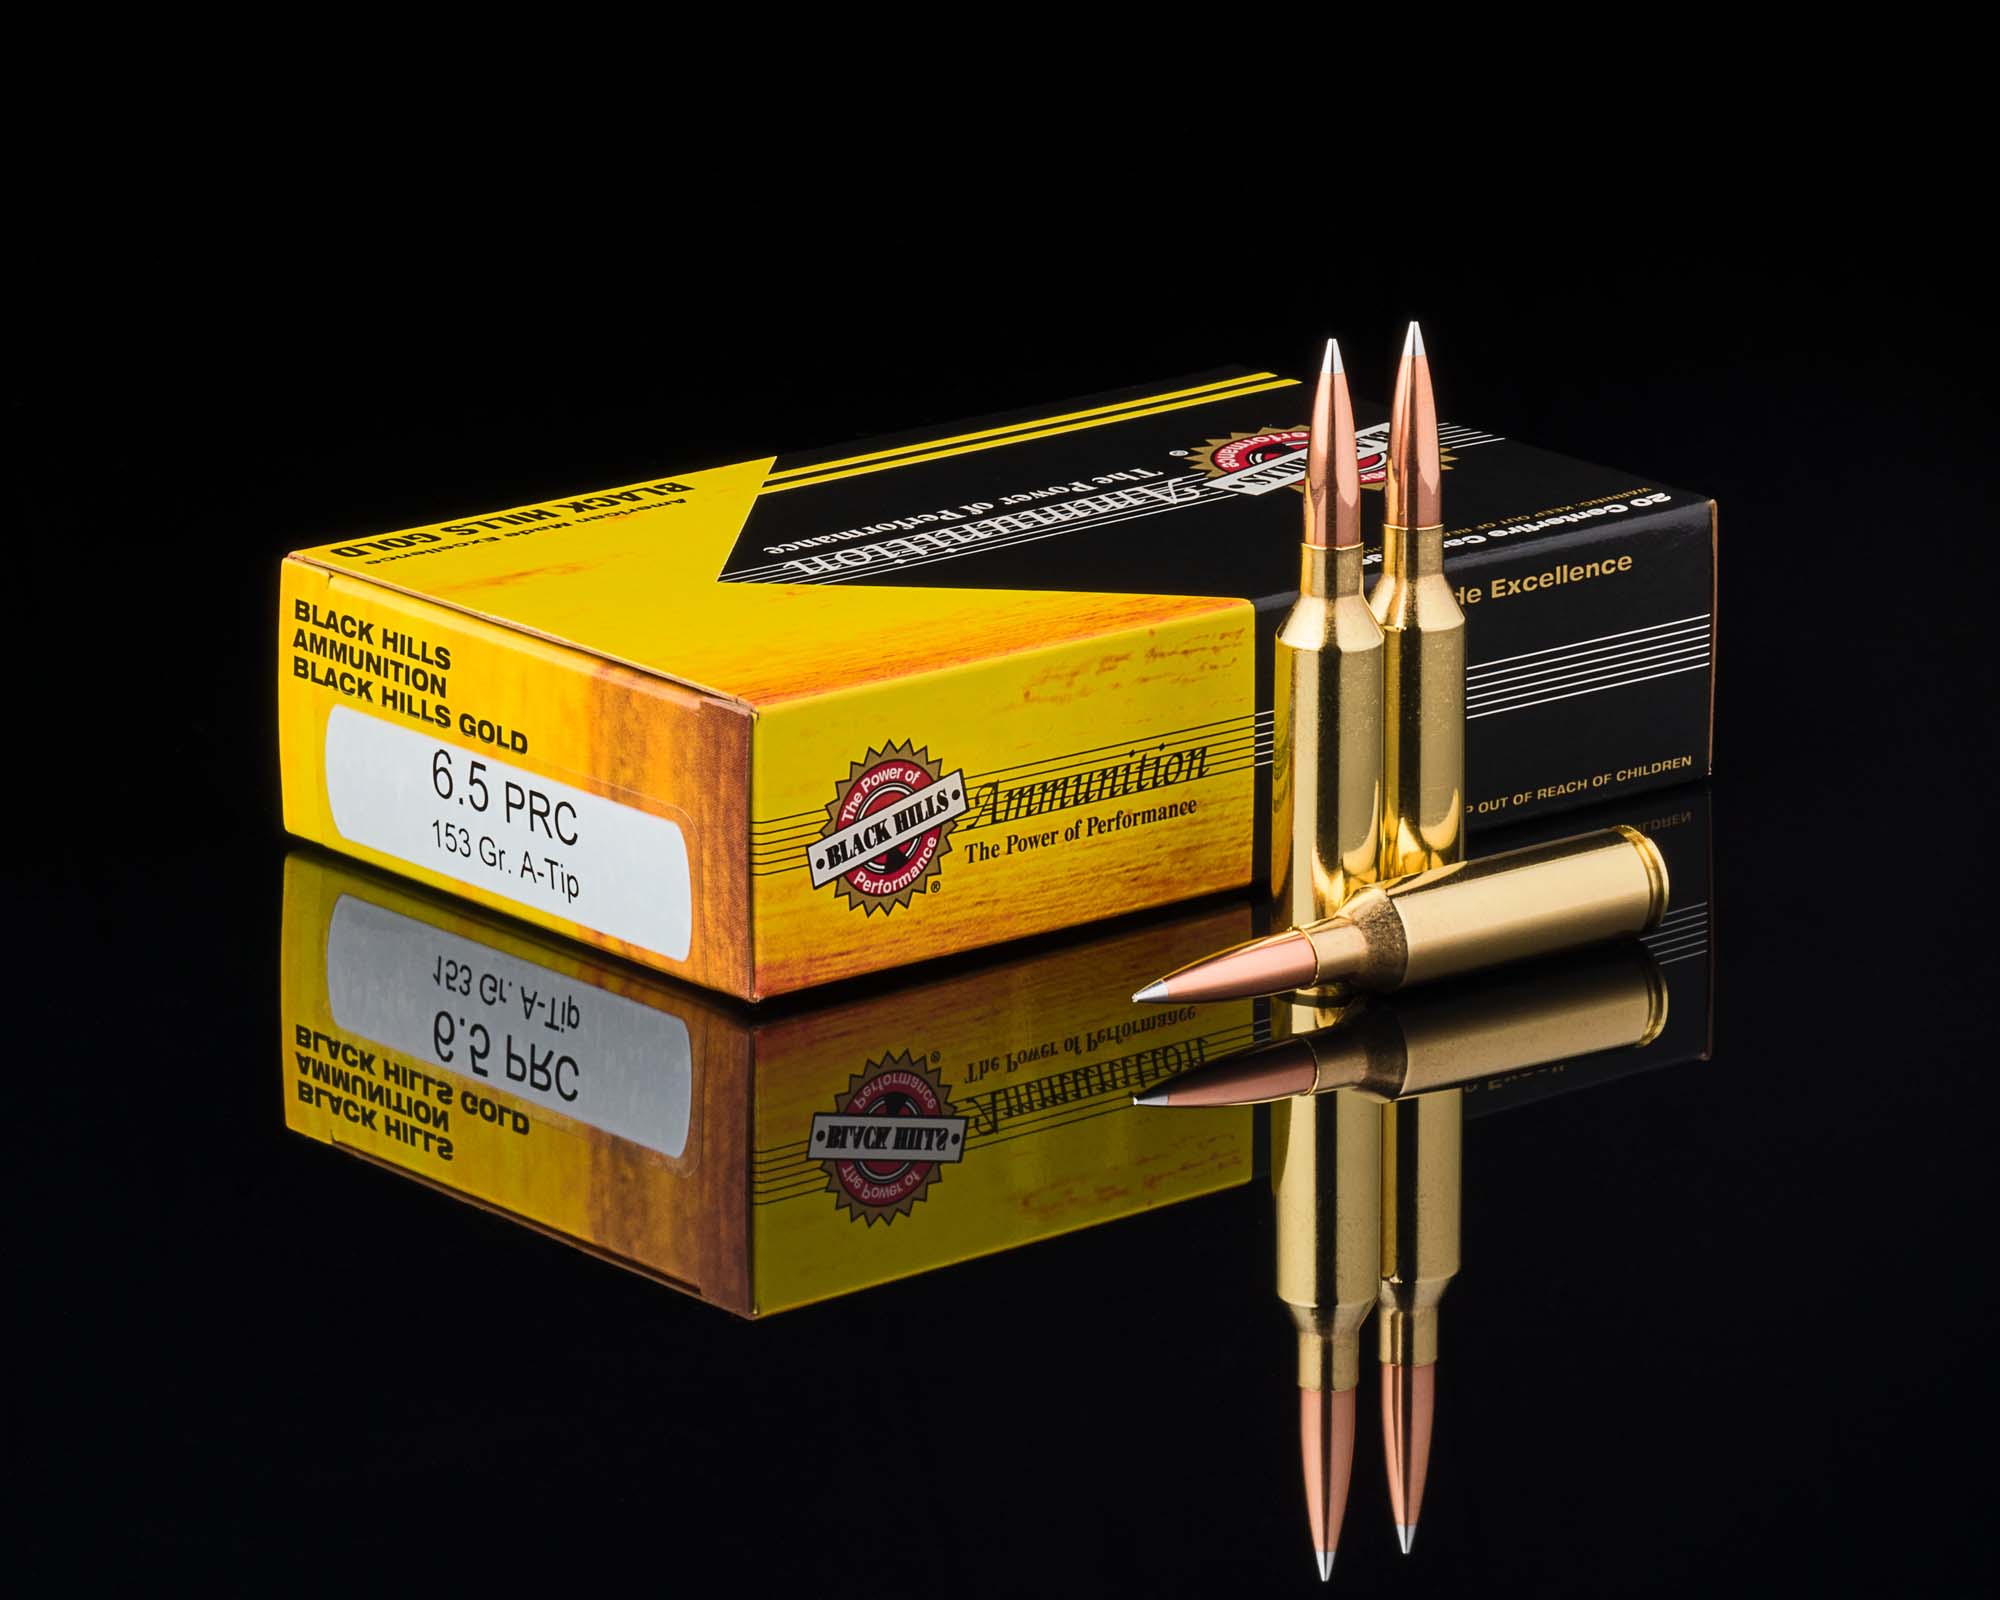 153 Gr A Tip Product Aaron C. Packard Photography Advertising